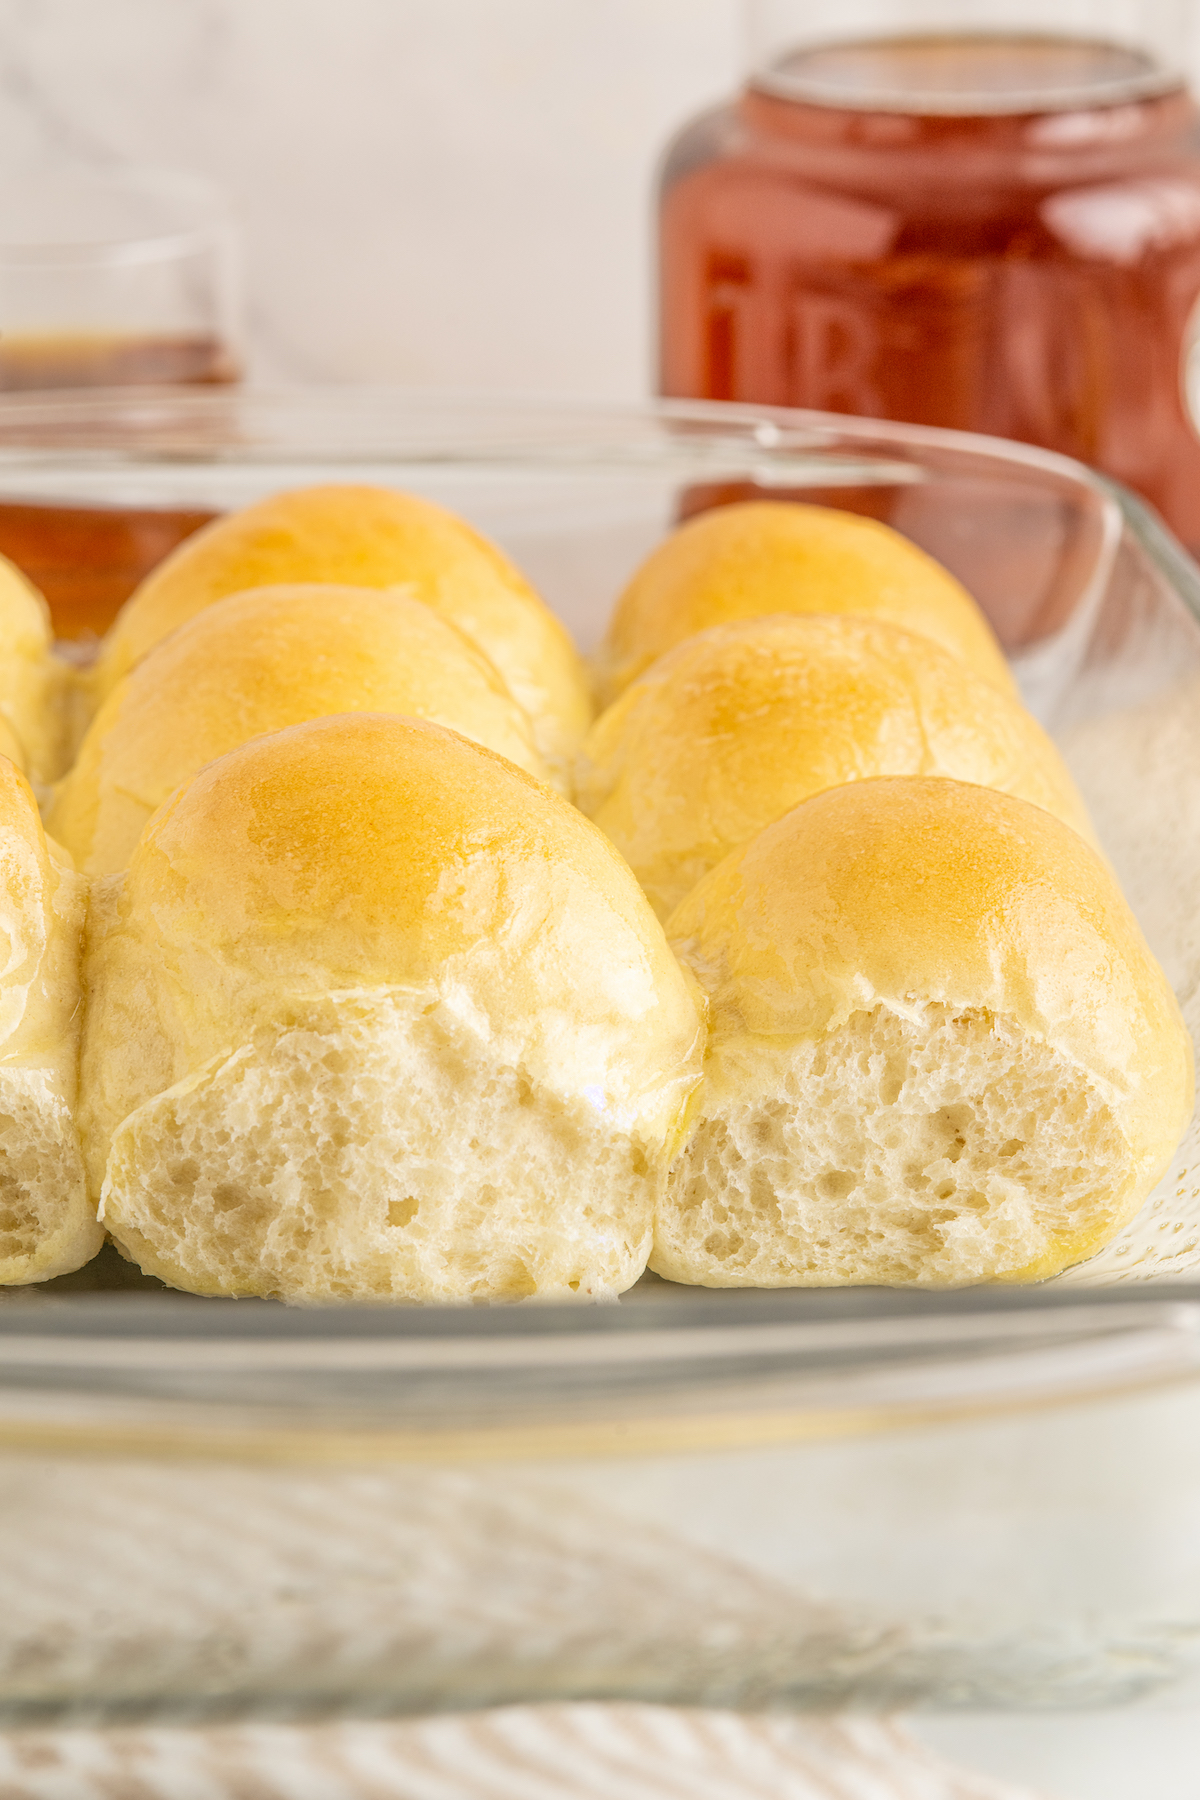 A side view of rolls, pulled apart to show the texture of the crumb.